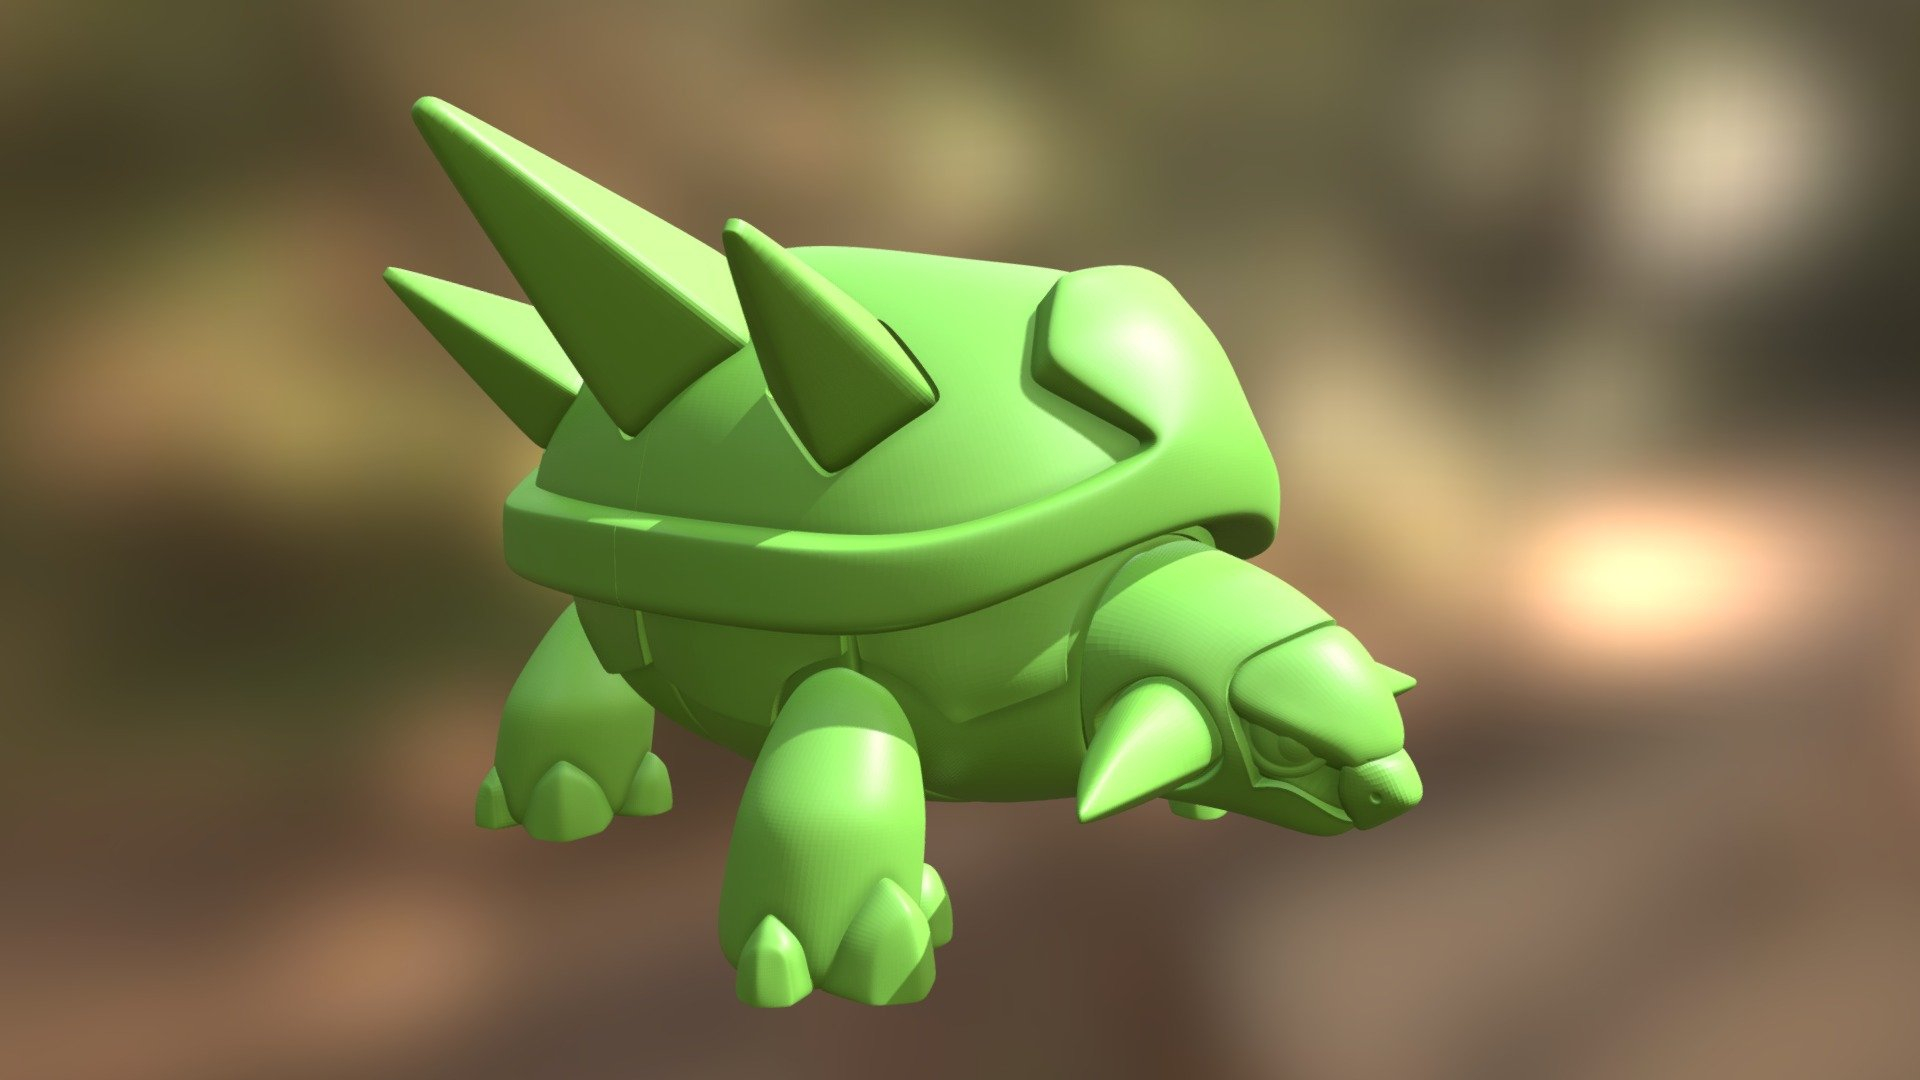 1920x1080 Pokemon Plant Pot Torterra Buy Royalty Free 3D model by 3Dimentional (@insectscorch) [cb78895